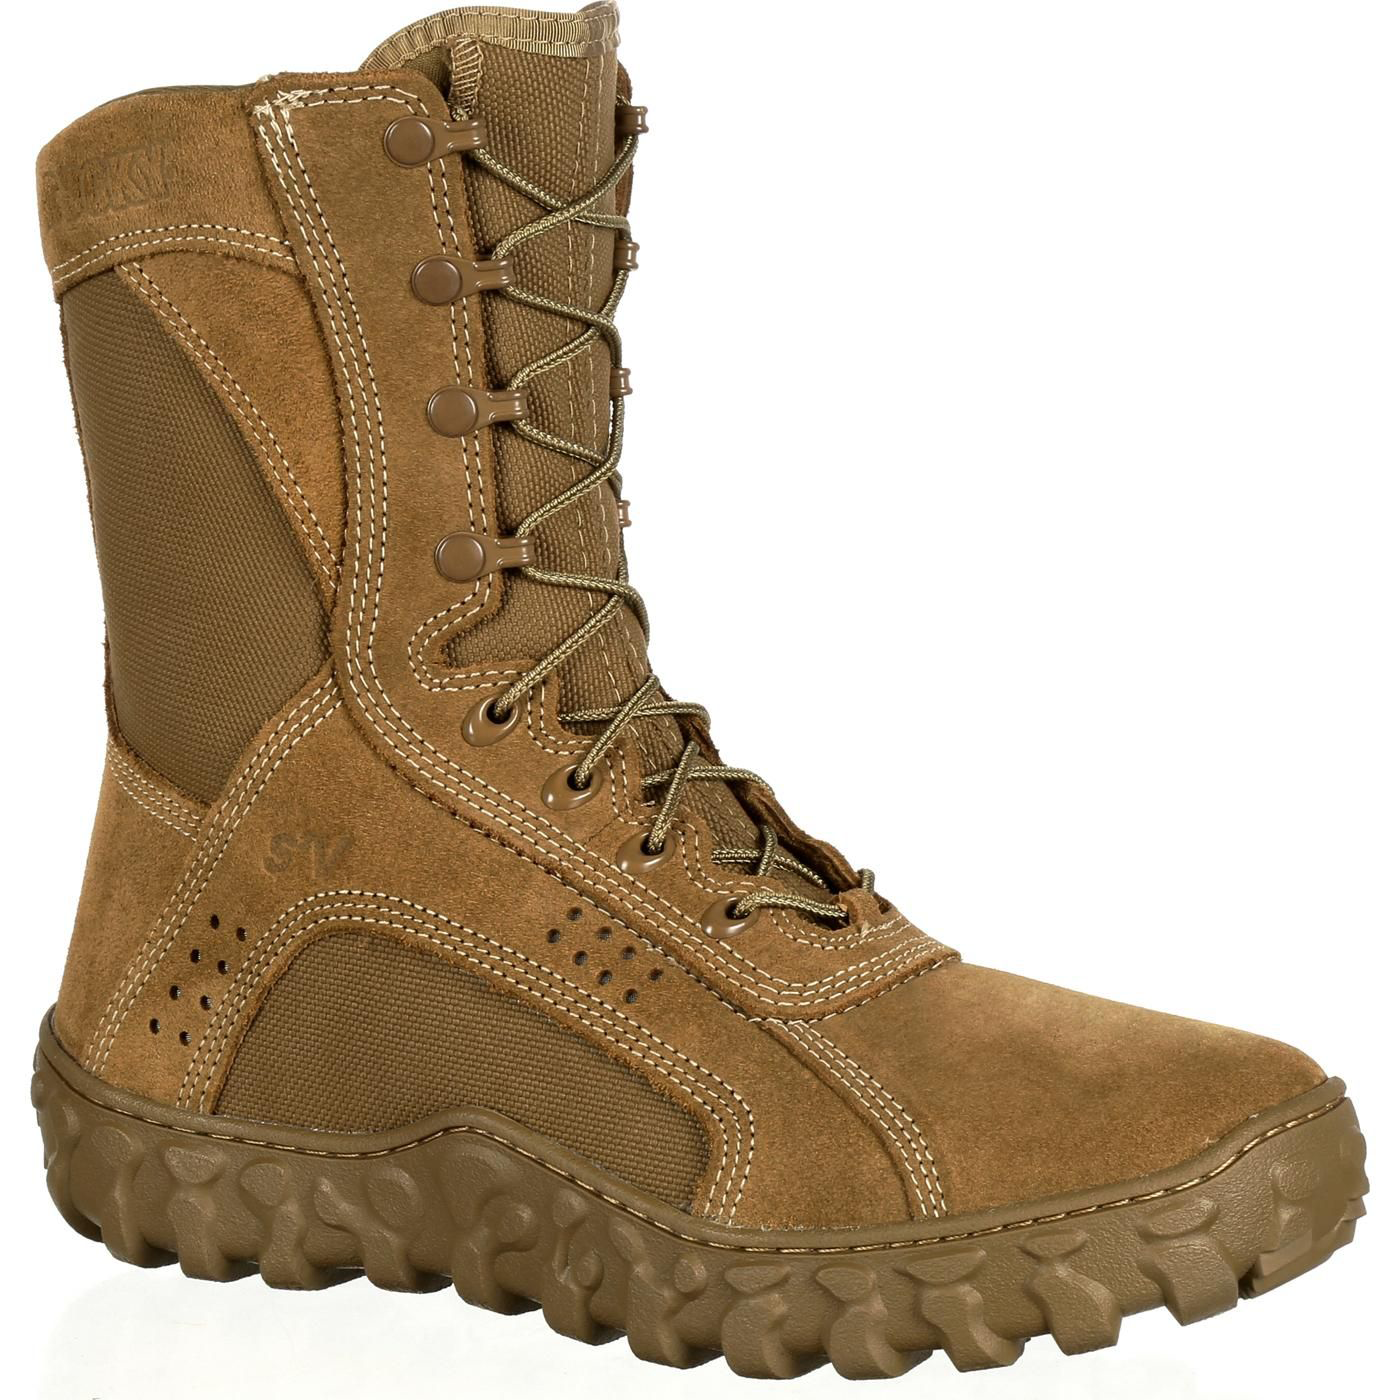 Rocky S2V Tactical Military Boots for Men - Coyote Brown - 15M